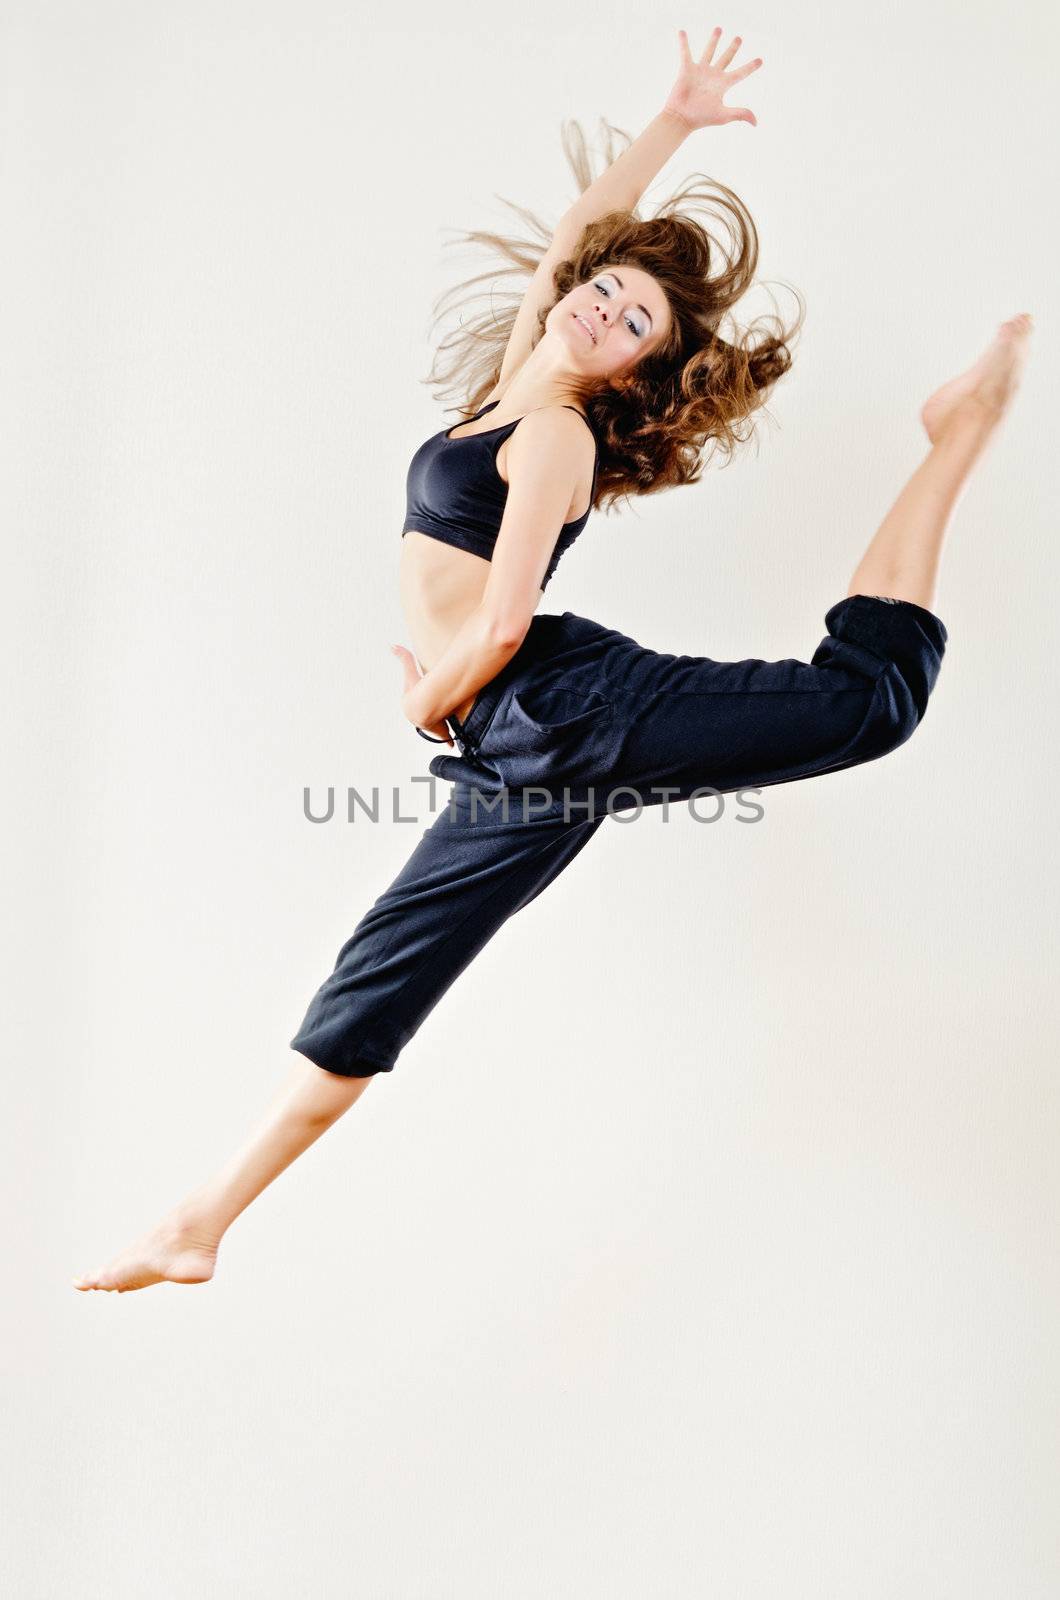 Attractive young woman jumping on white background